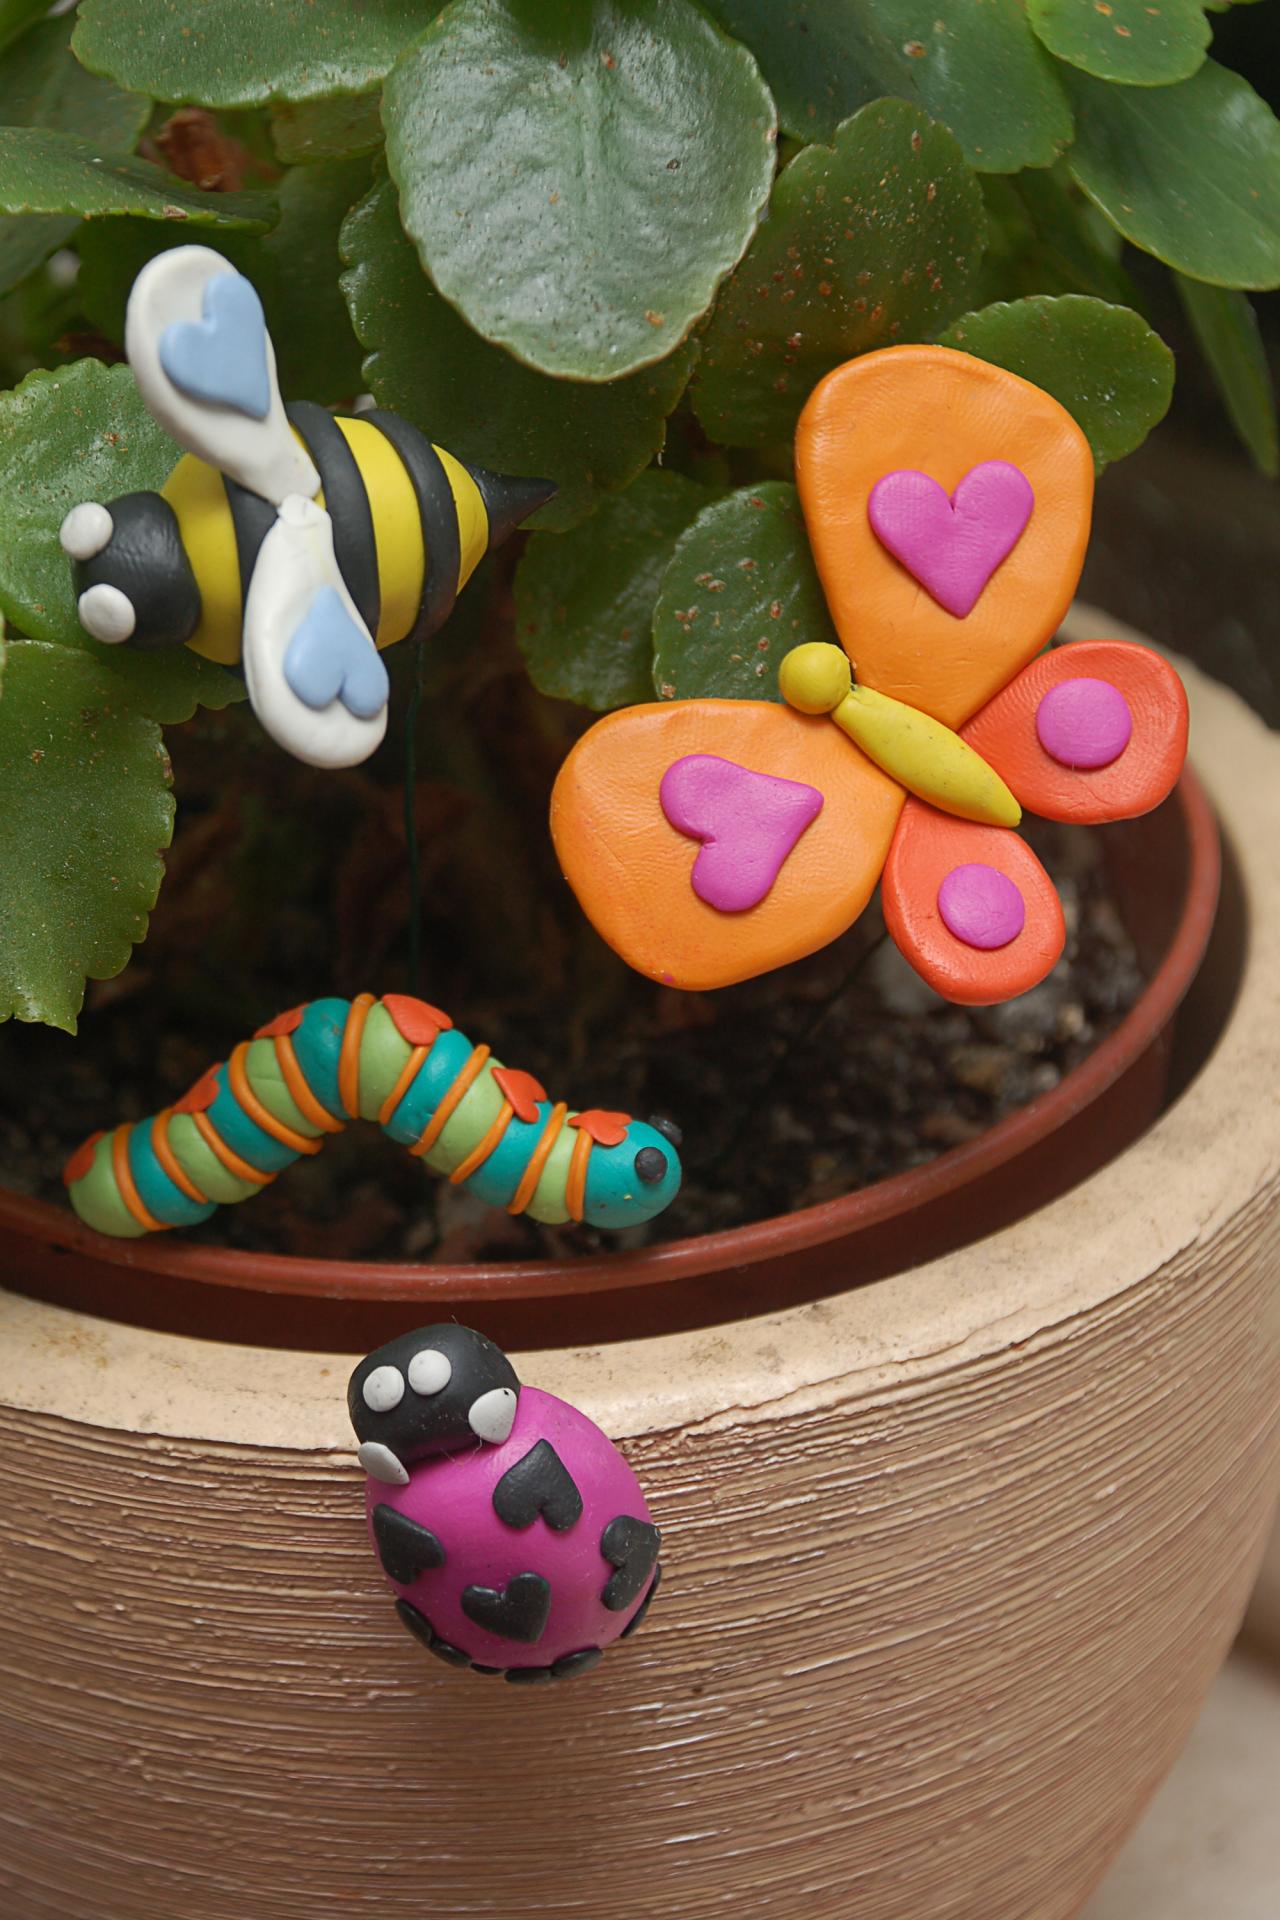 21 Most Stylish Oven Bake Clay Projects